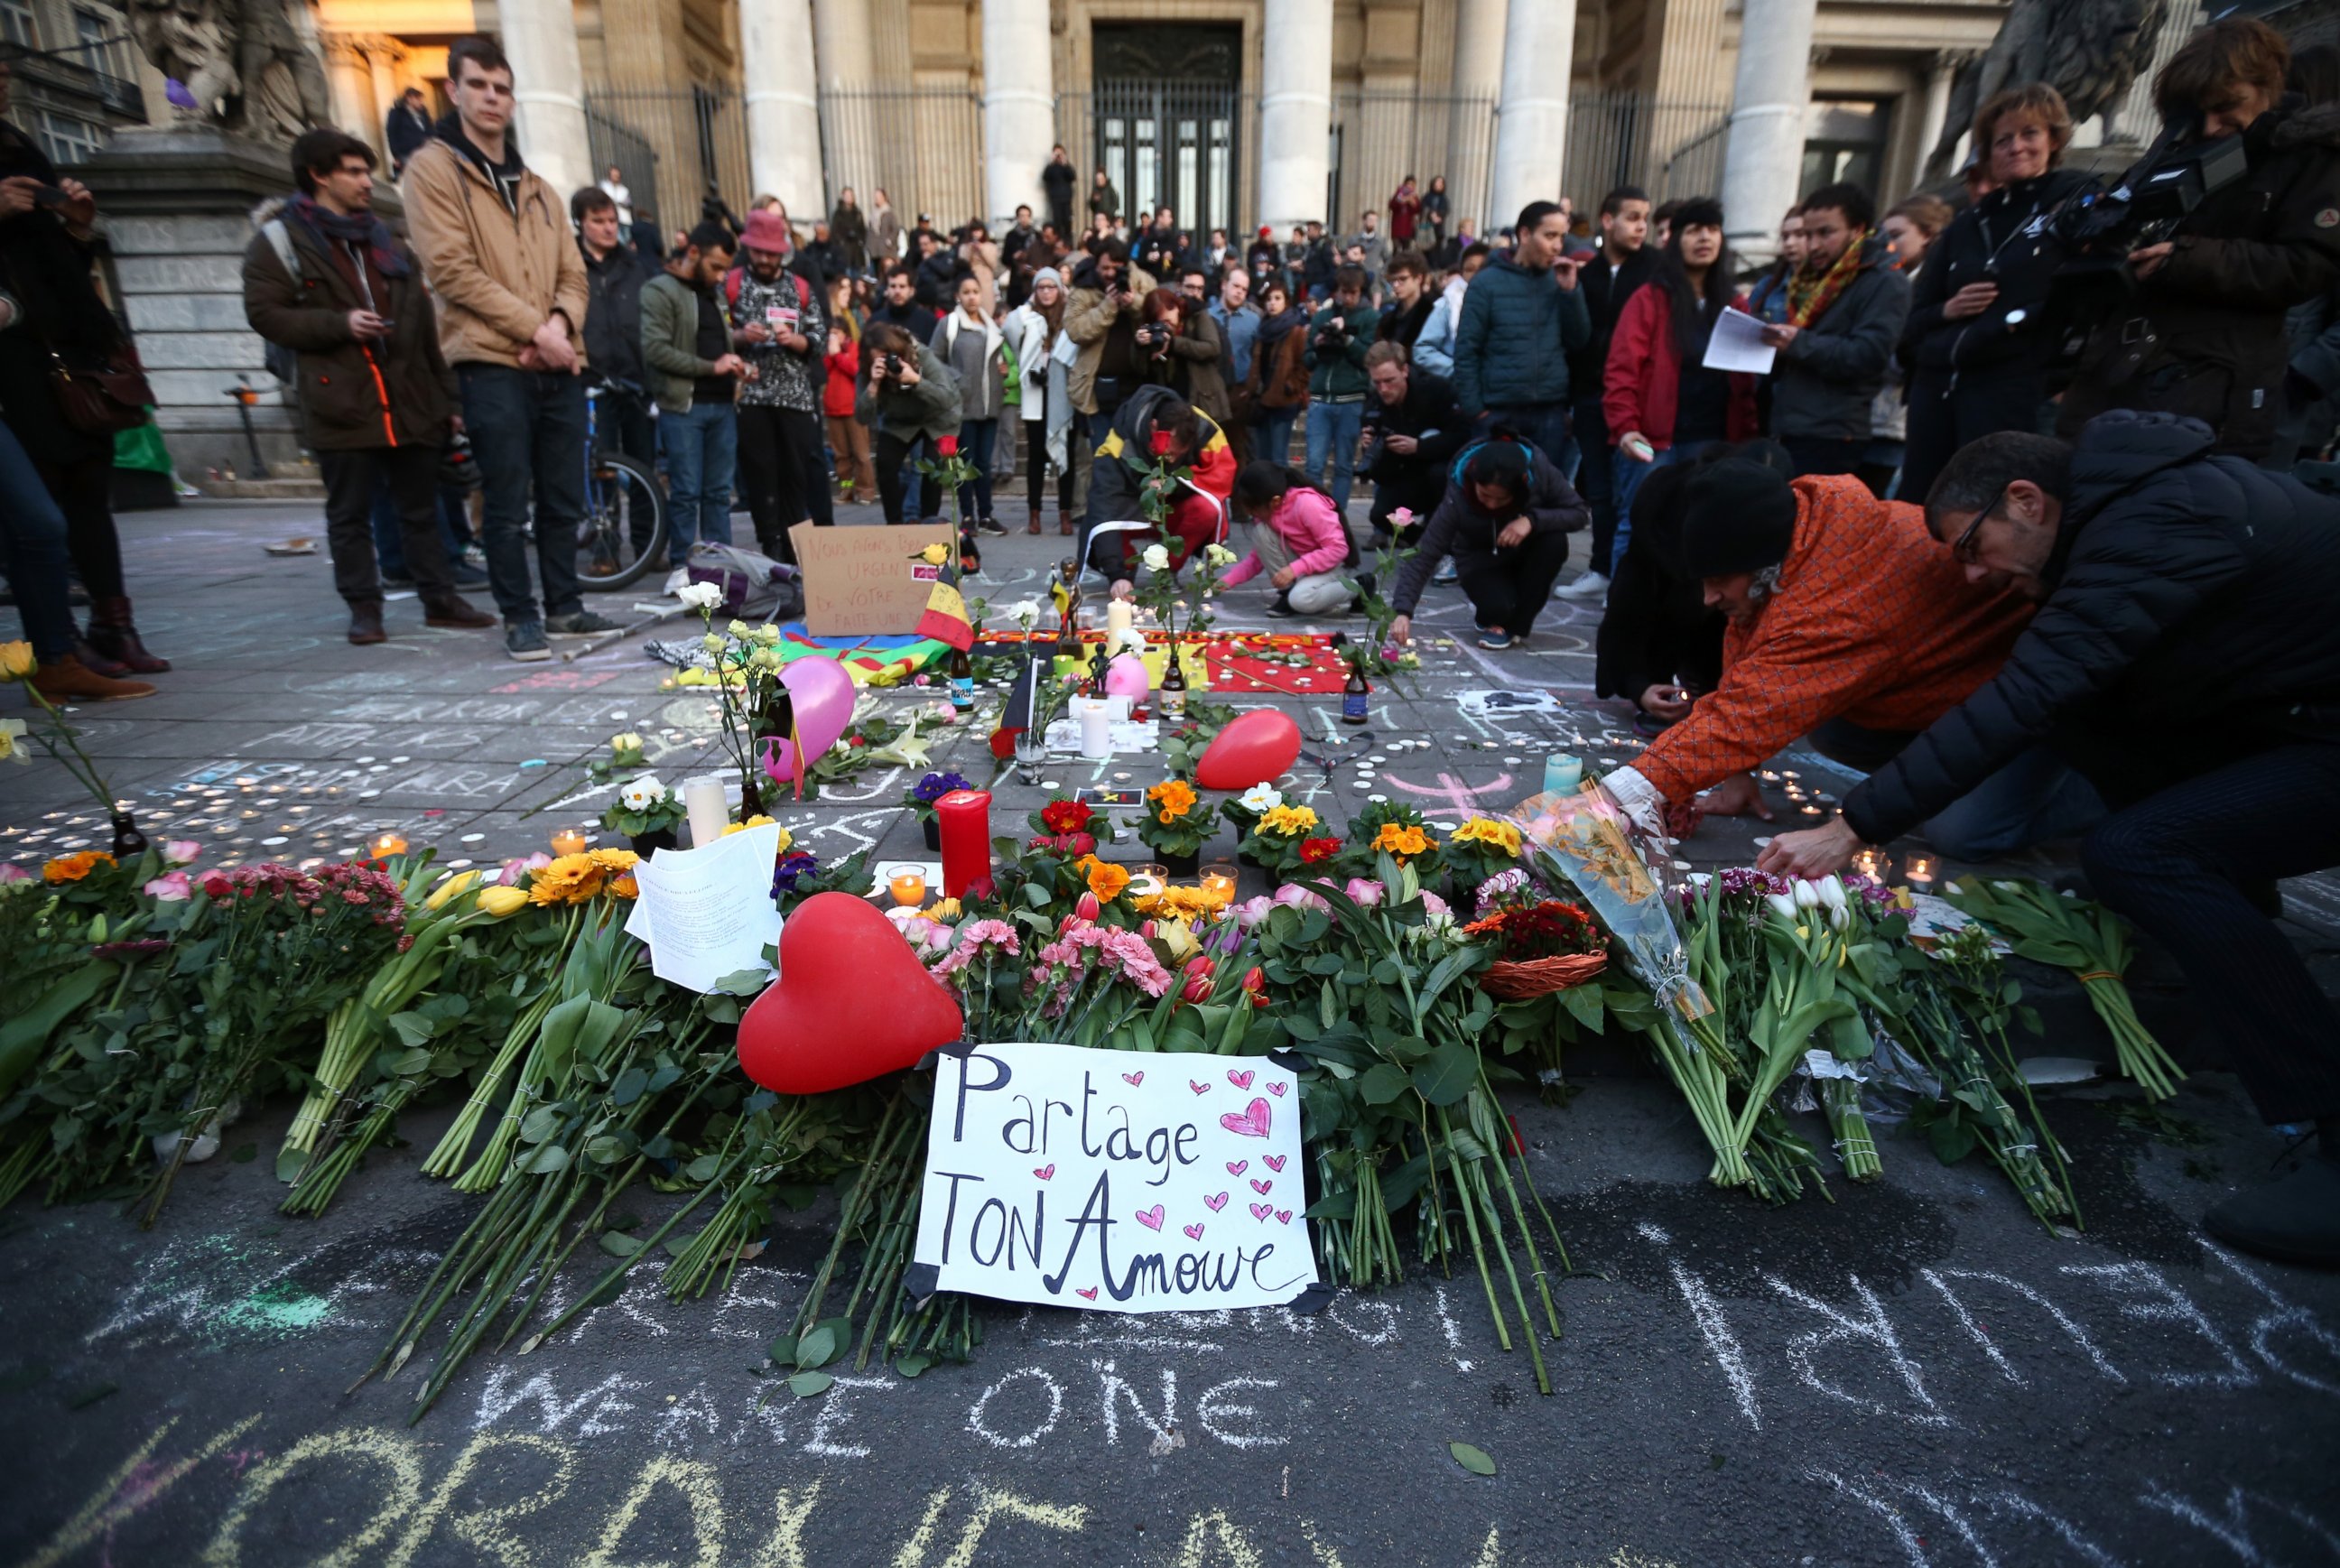 PHOTO: People gather to leave tributes at the Place de la Bourse following today's attacks, March 22, 2016 in Brussels.